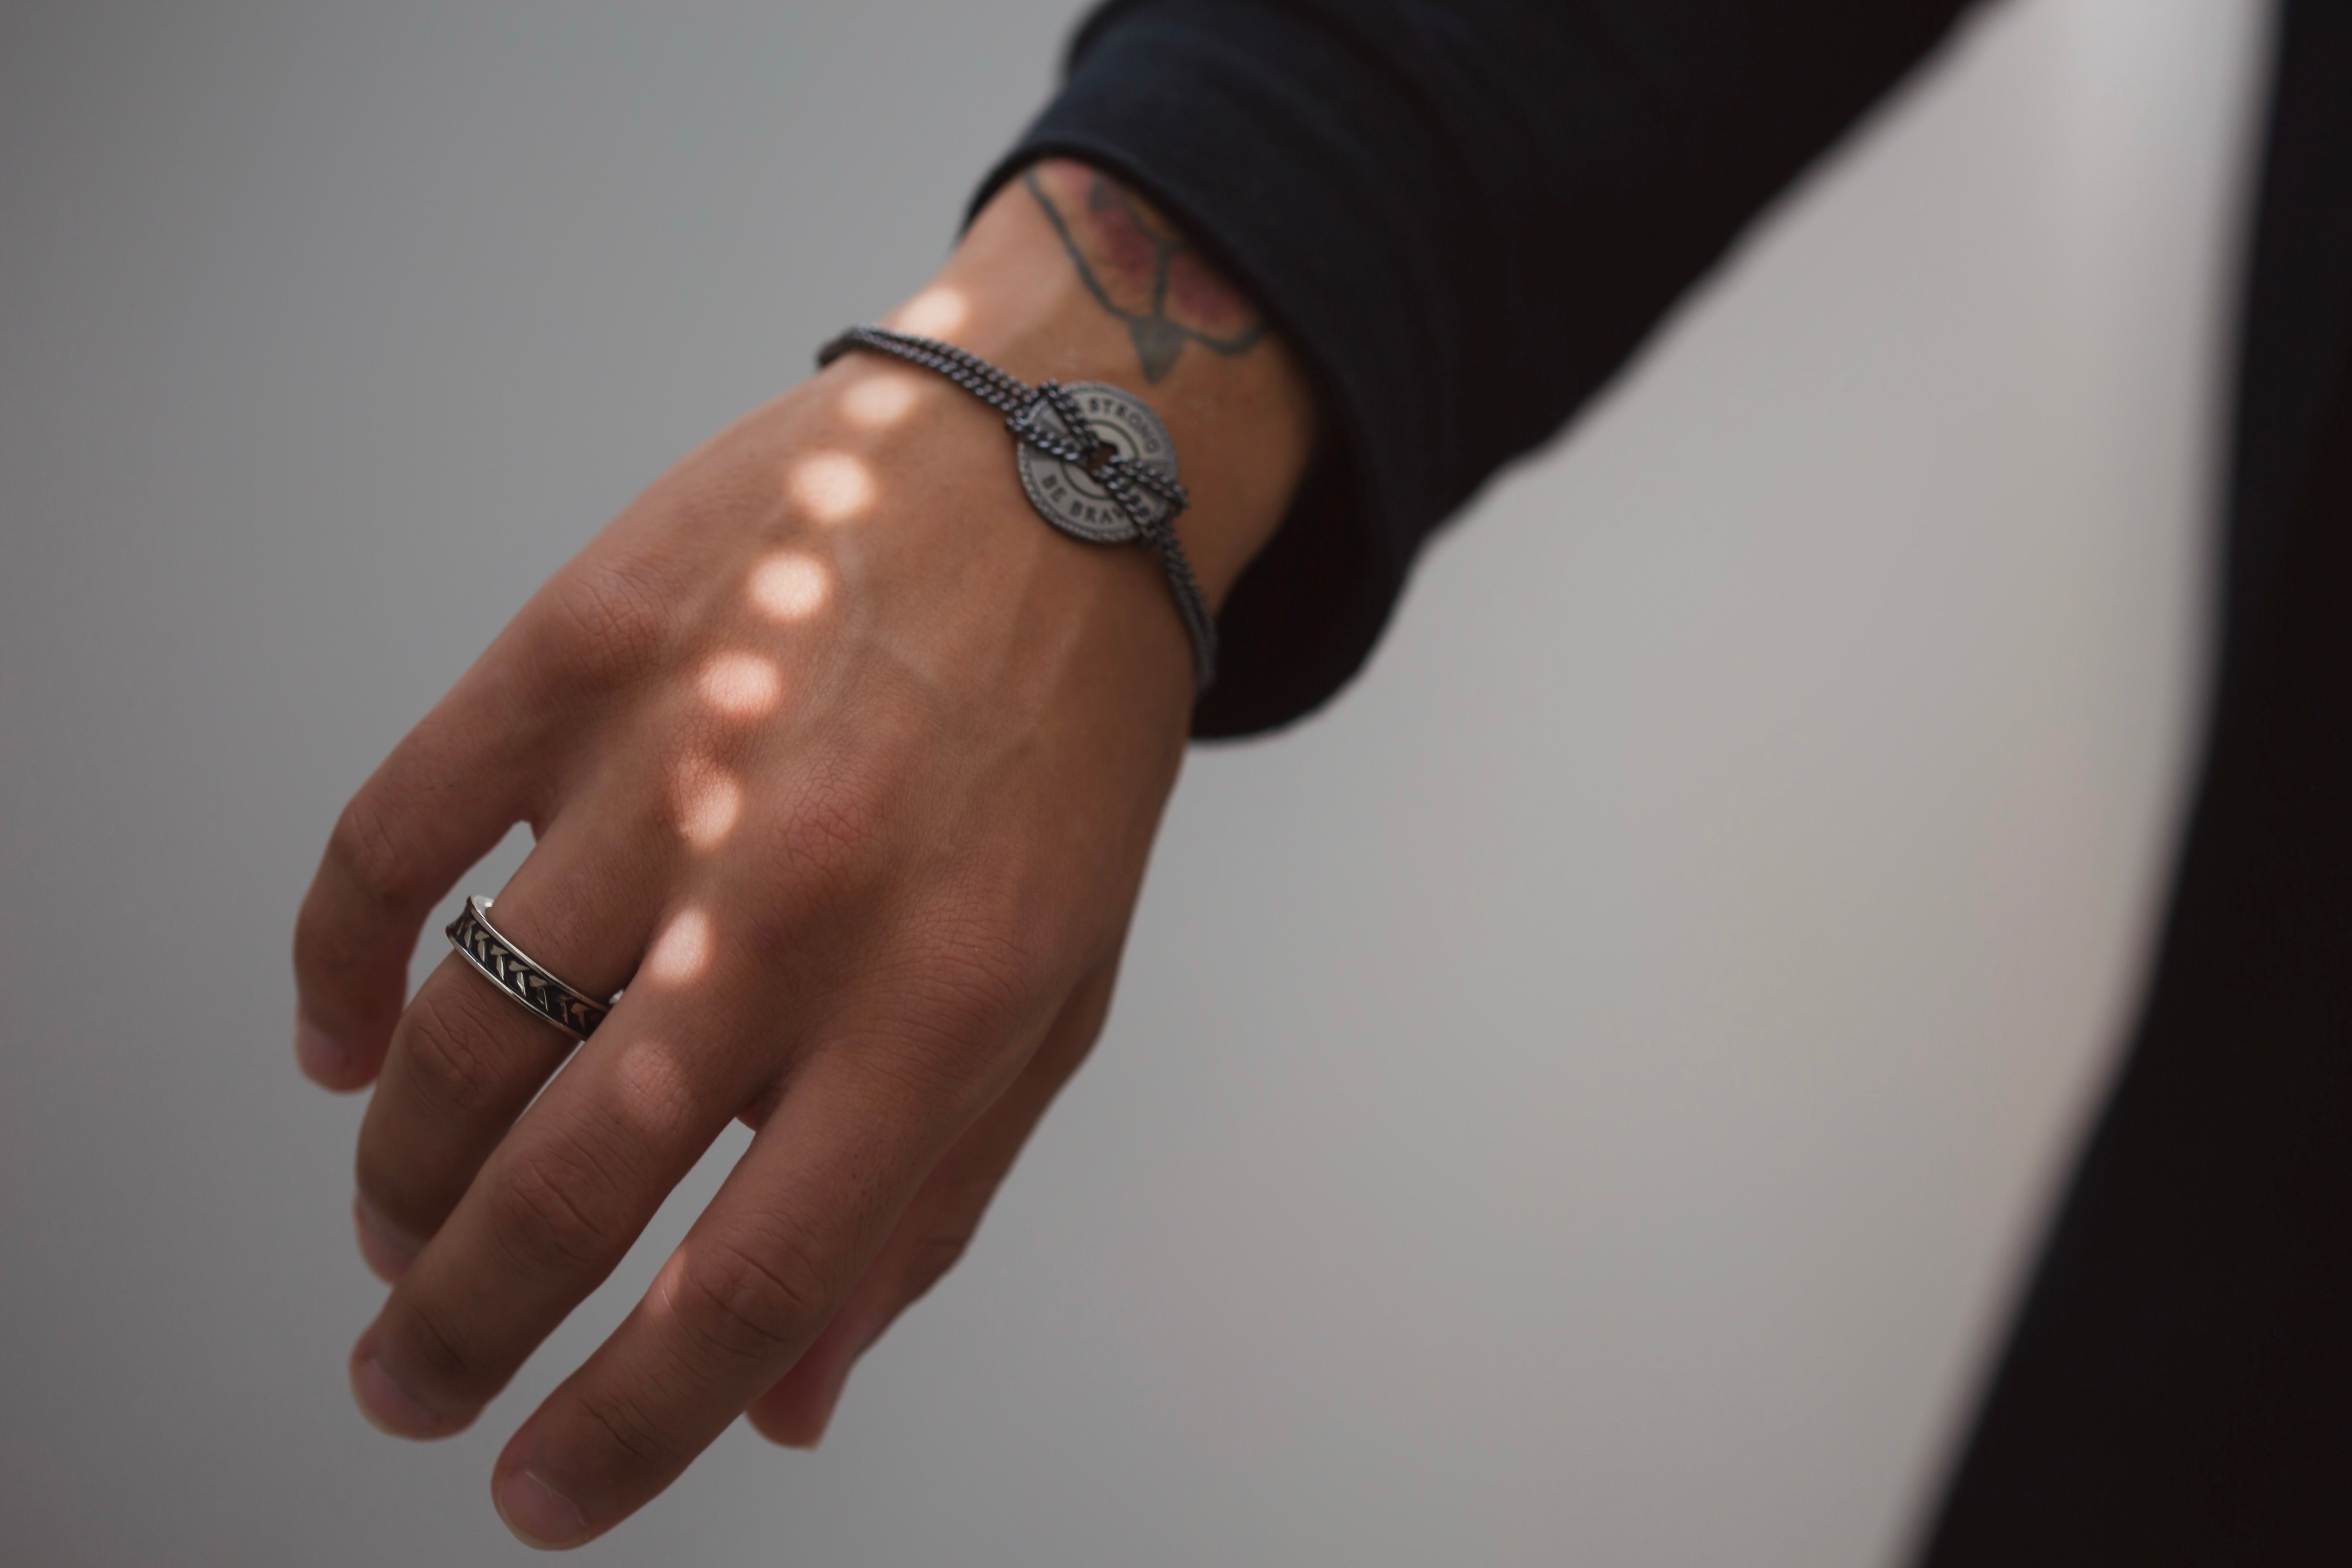 man's hand with stainless steel ring on ring finger and a bohemian-style bracelet on wrist